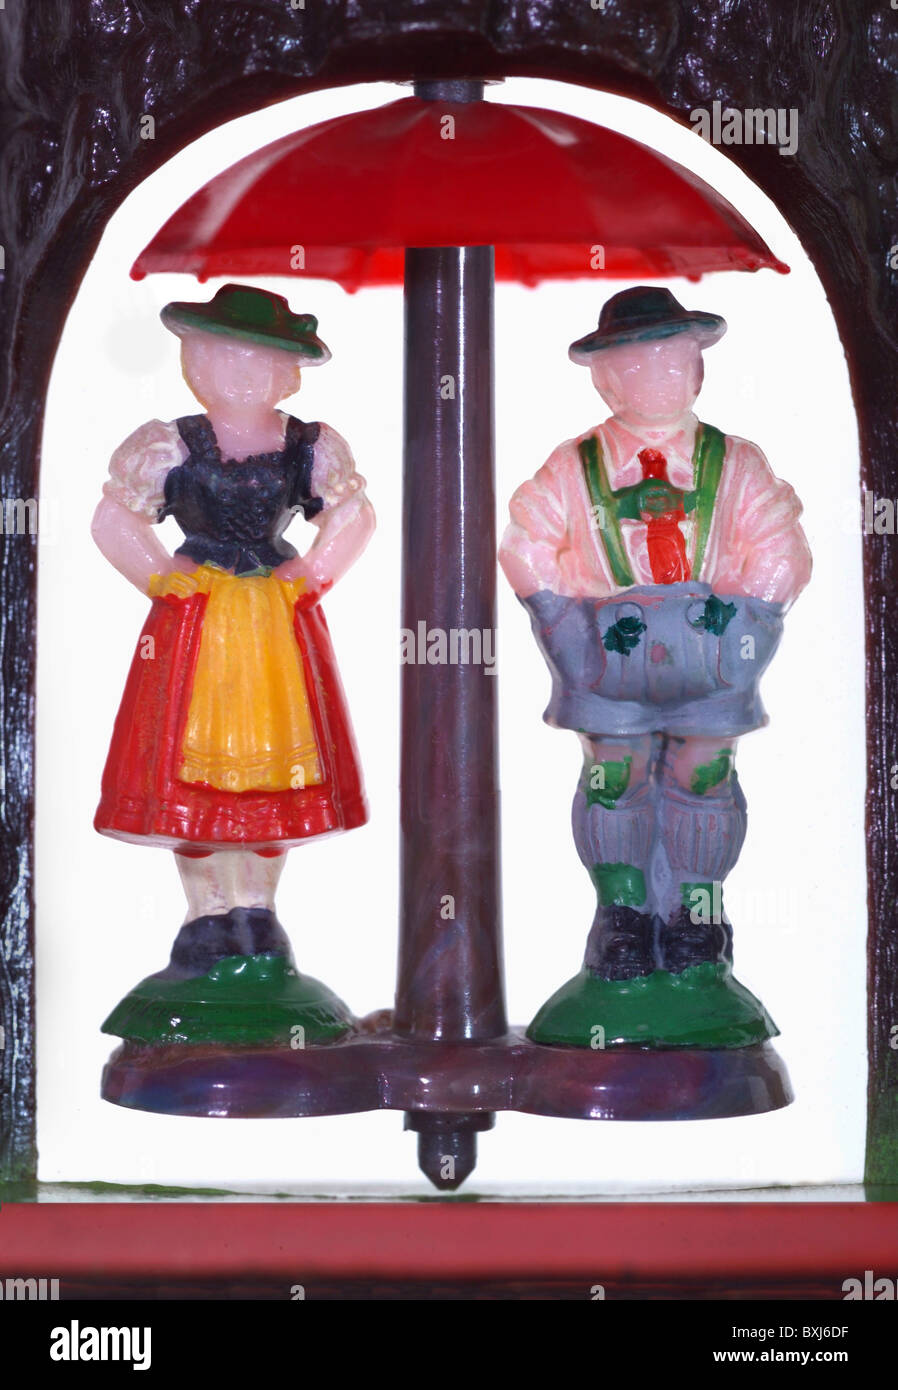 weather / climate, wooden weatherhouse, detail, Germany, circa 1960s, symbol, house, meteorology, humor, still, clipping, cut out, 1960s, 60s, historic, historical, 20th century, thermometer, thermometers, wet-bulb thermometer, Black Forest, summer, souvenir, kitsch, forecast, rain, raining, couple, couples, figures, dirndl, Bavarian, cut-out, cut-outs, people, woman, women, female, man, men, male, Additional-Rights-Clearences-Not Available Stock Photo